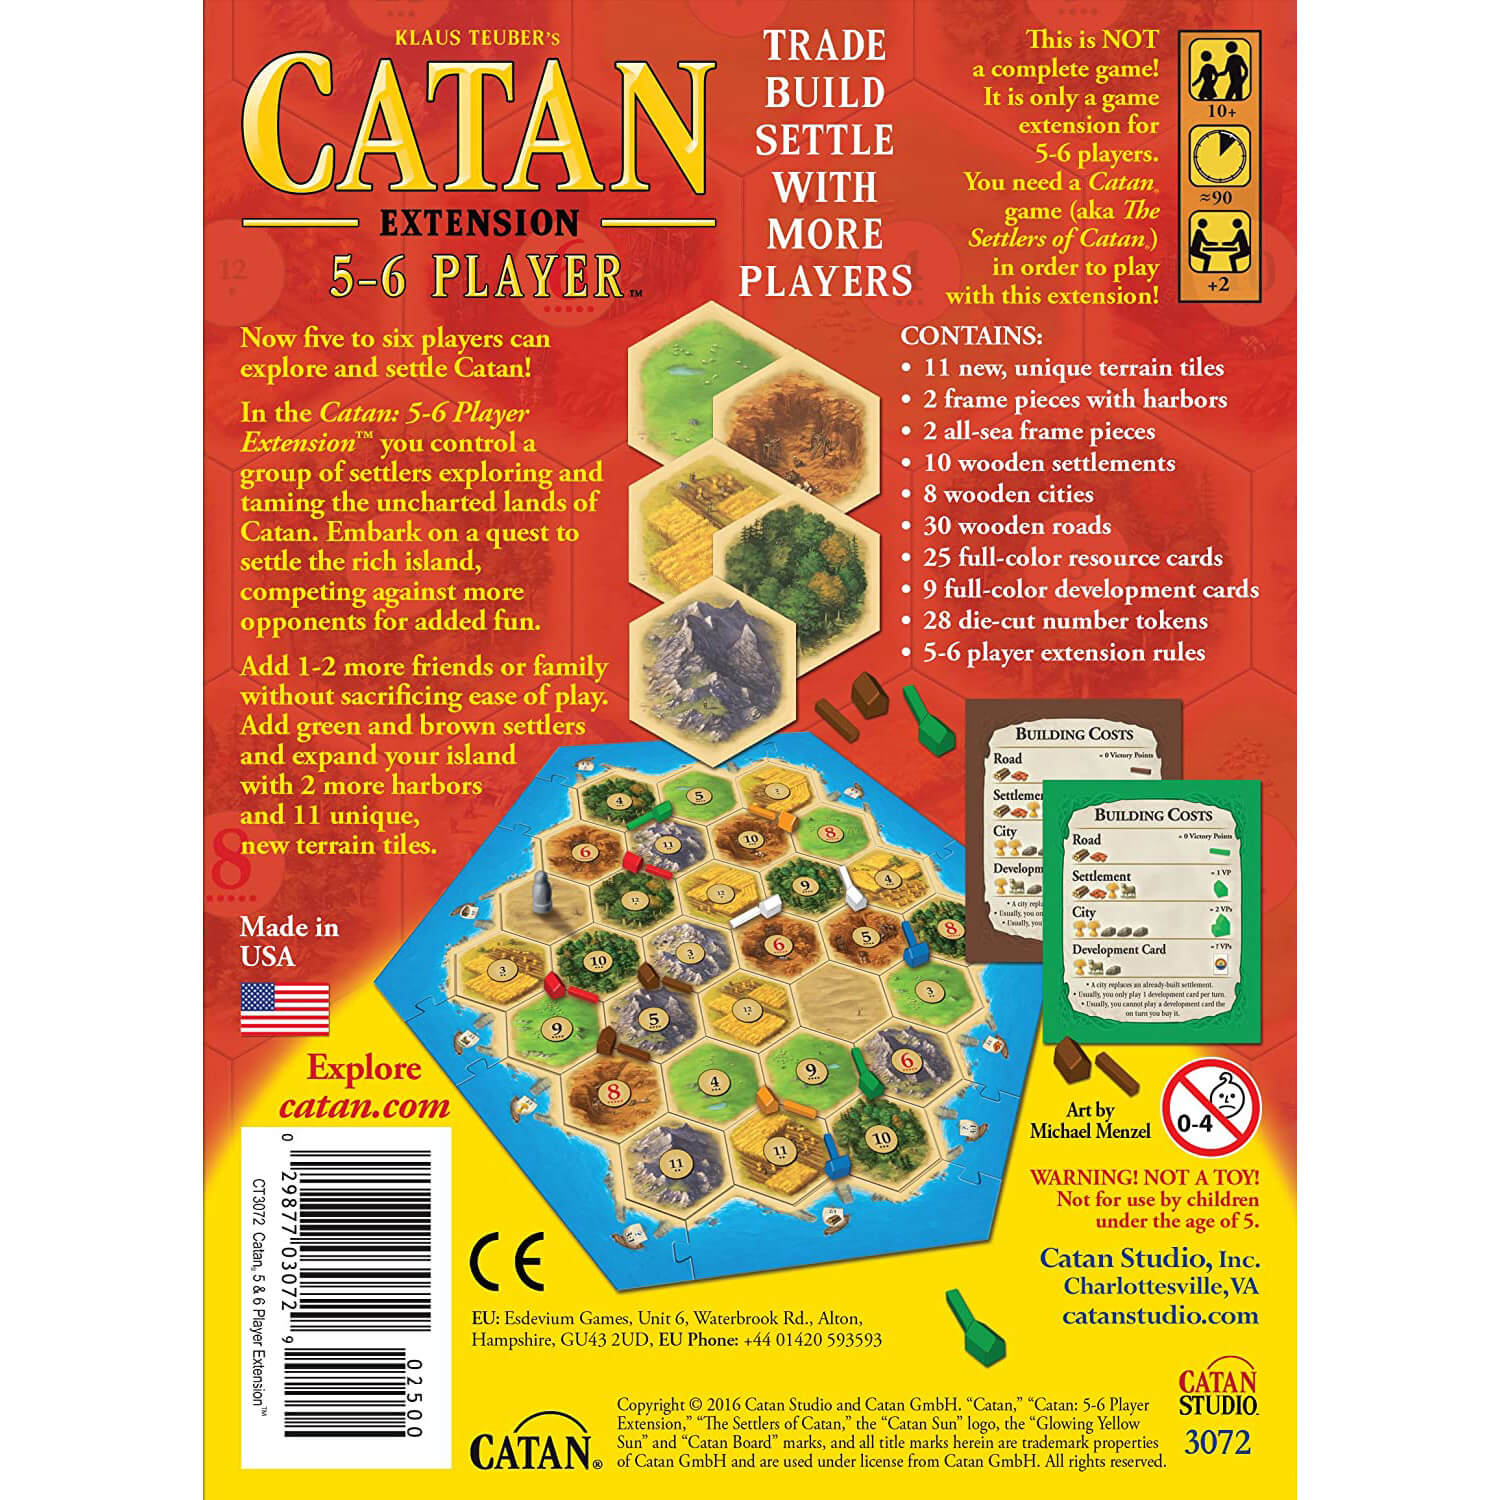 Catan Game Exention (5-6 Players)